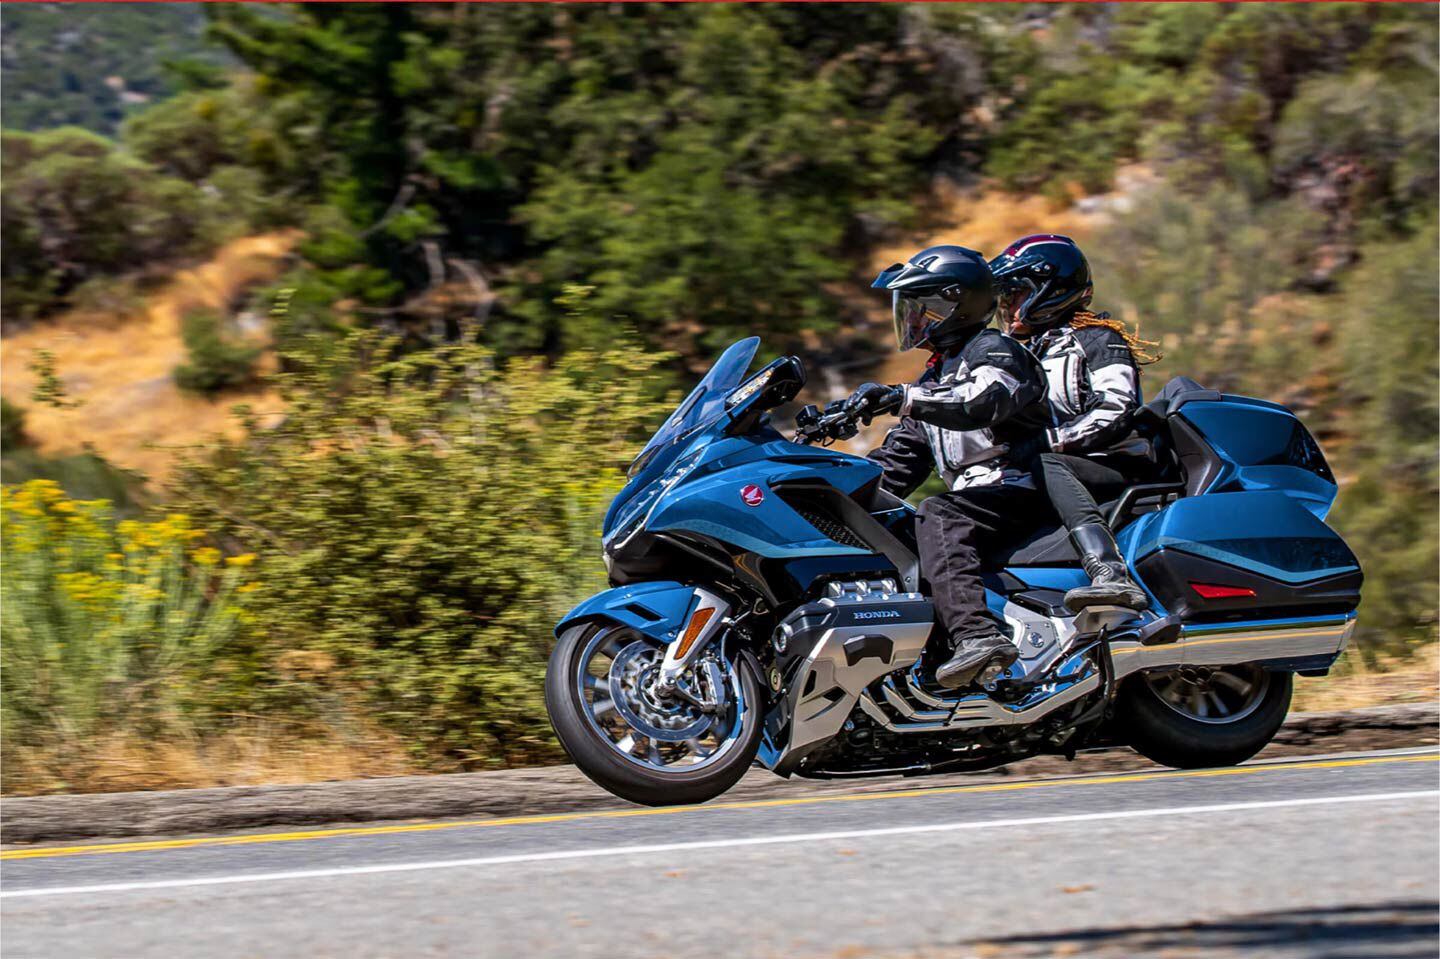 Six cylinders, seven speeds, and reverse, too. You get a lot to like with the Honda Gold Wing.